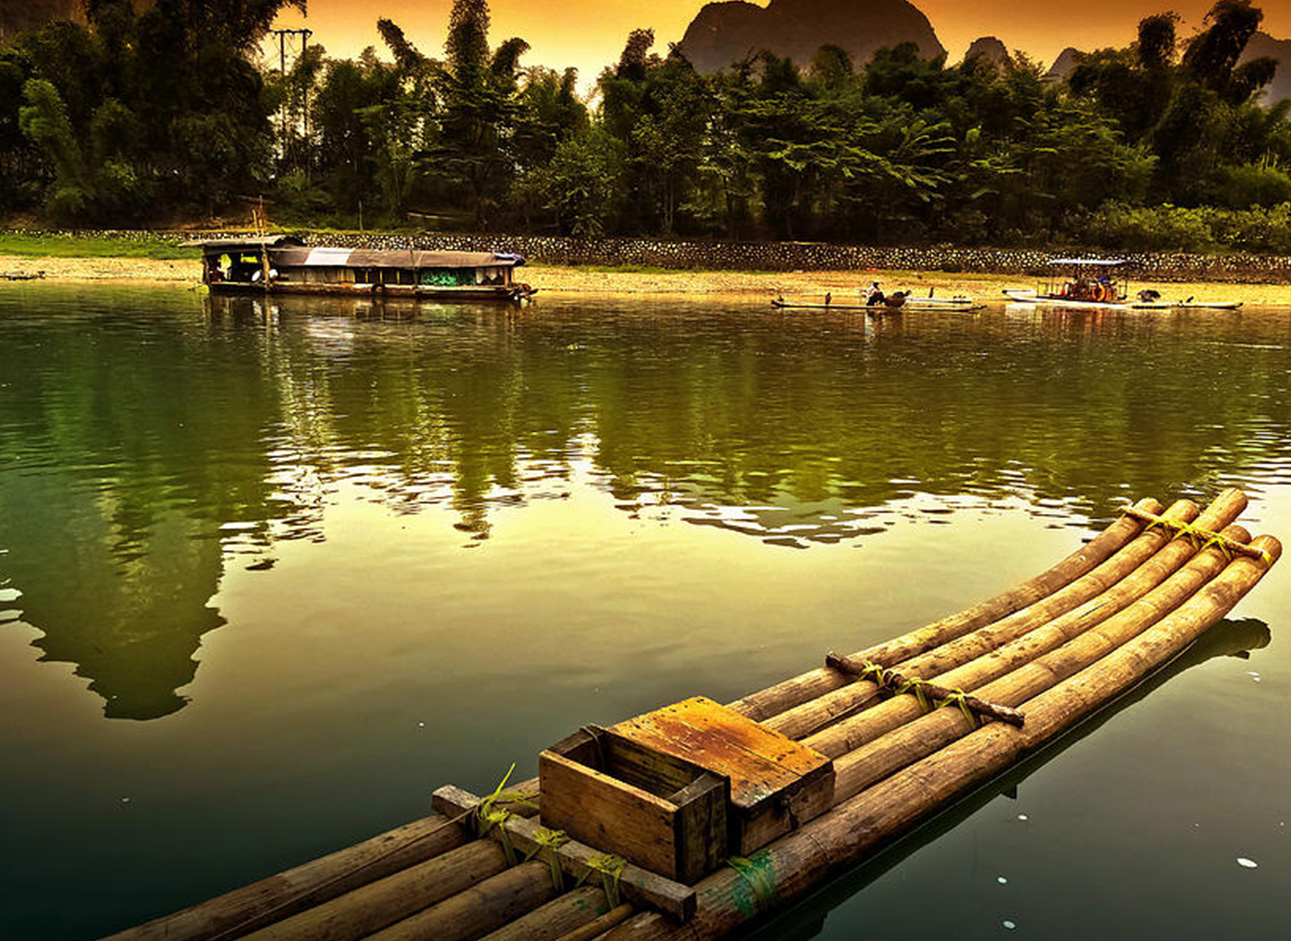 Bamboo Raft - Enjoy peaceful river rides on traditional bamboo rafts